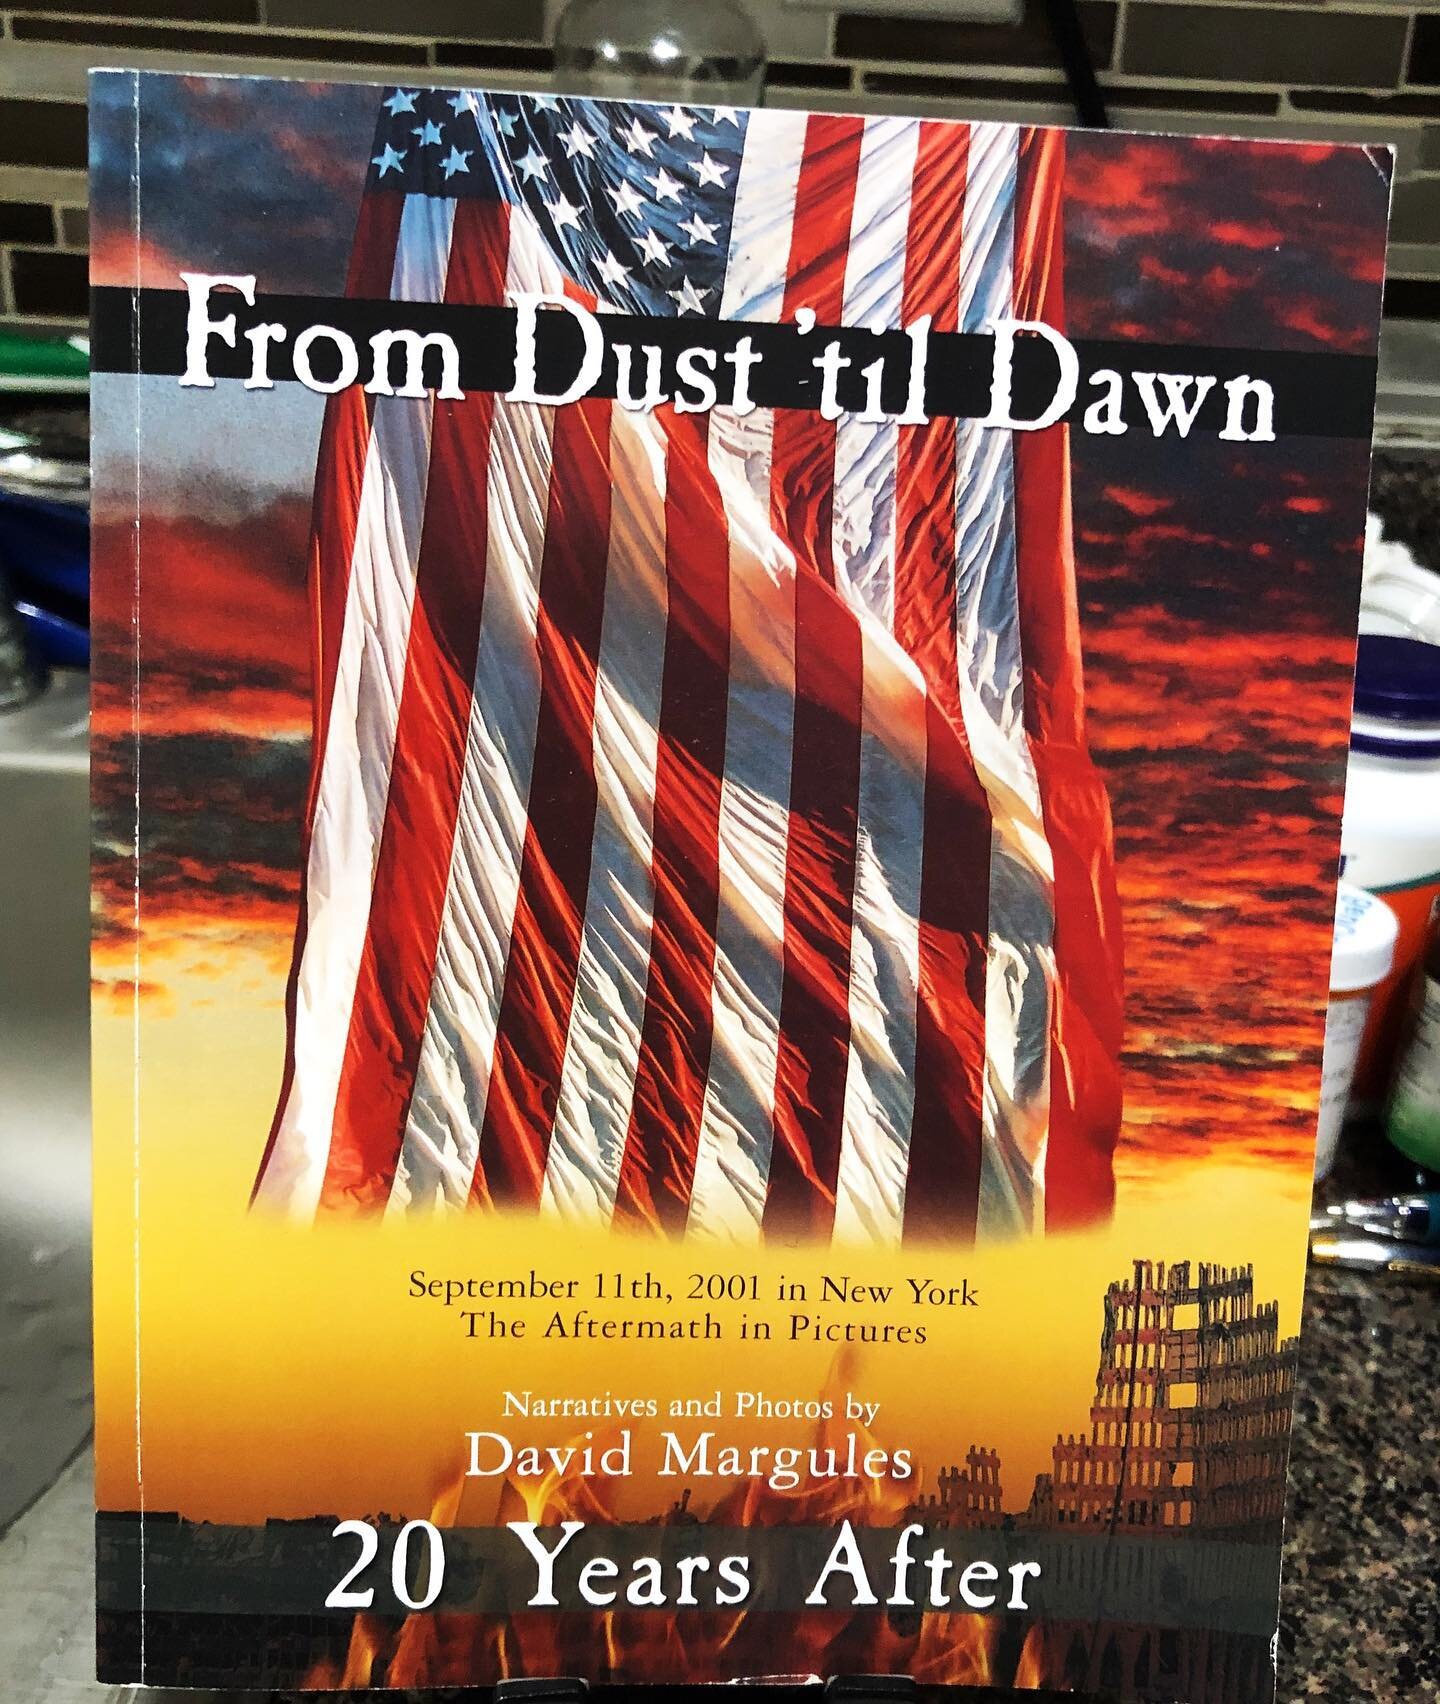 Tomorrow Monica Iken and I will be with Hilary Clinton to discuss 9/11 and our Joint Effort &ldquo;From Dust til Dawn ((( 20 Years After ))) Book
www.fromdusttildawn.com @septembers_mission_foundation  #september11 #september11memorial #wtcmemorial